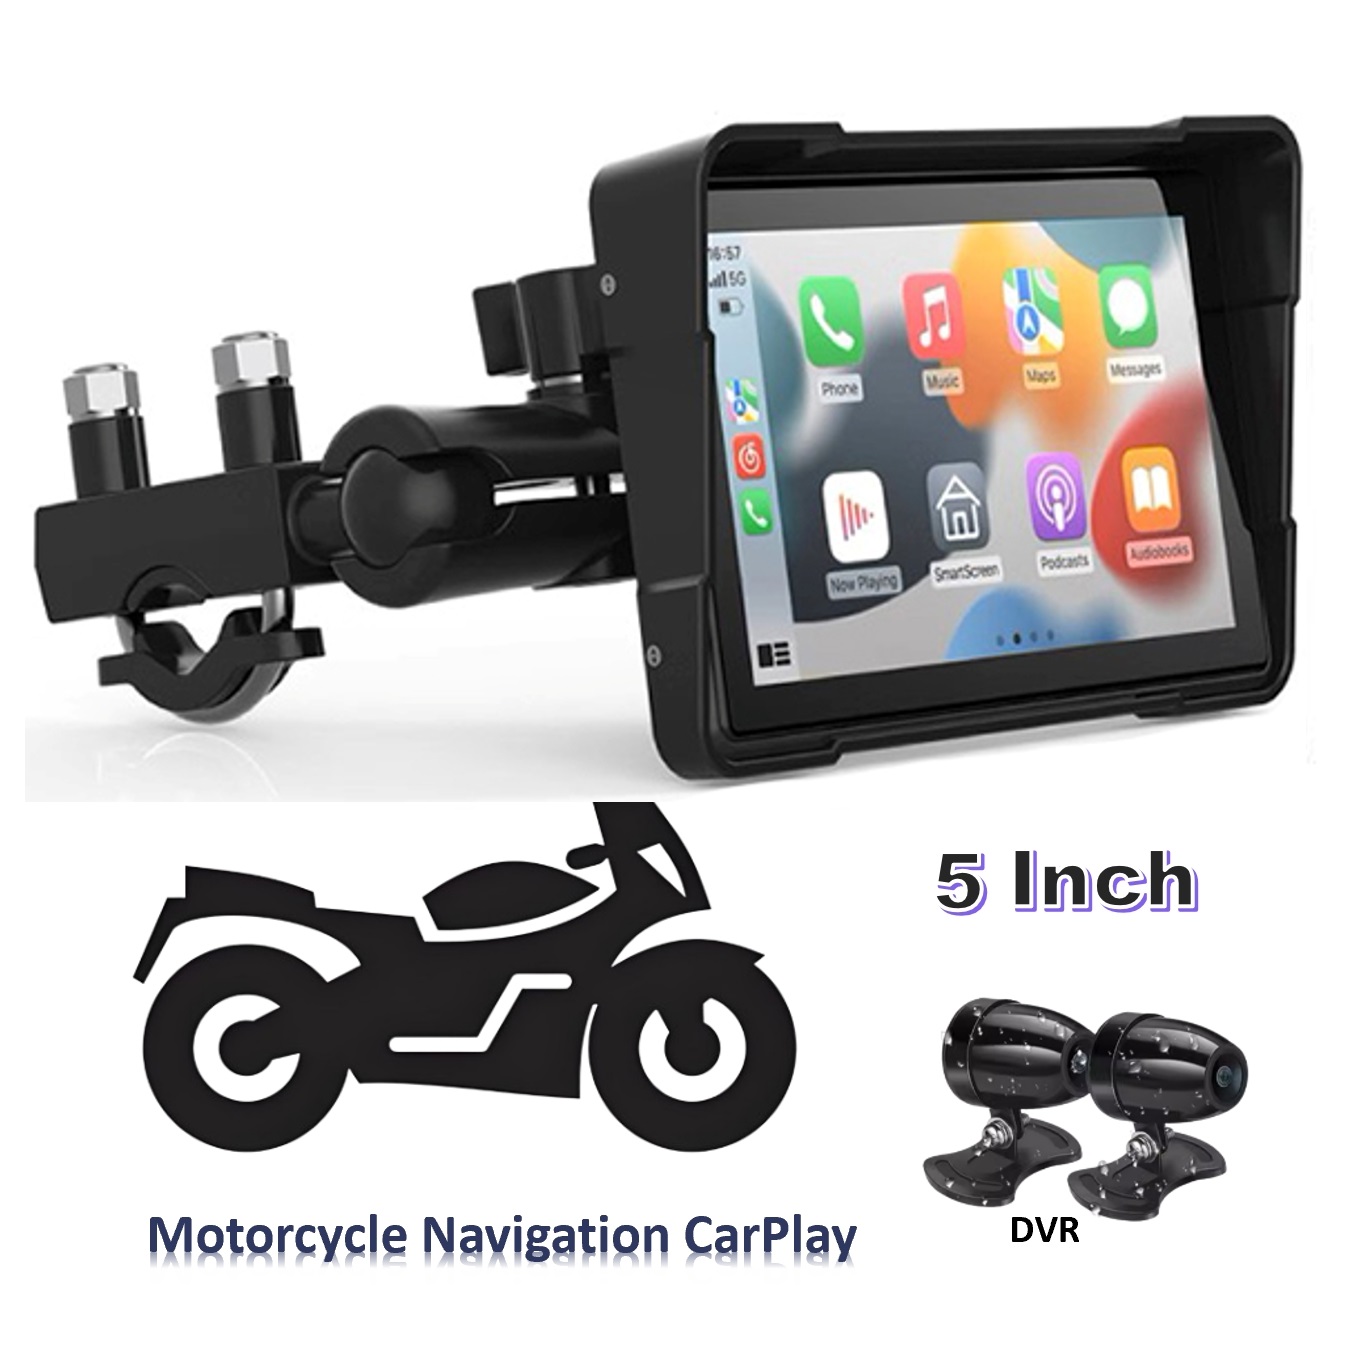 Zmecar Motorcycle Car Play IP67 Waterproof 5 Inch Touch Screen Android Auto DVR BT Navigation GPS Motorcycle Carplay